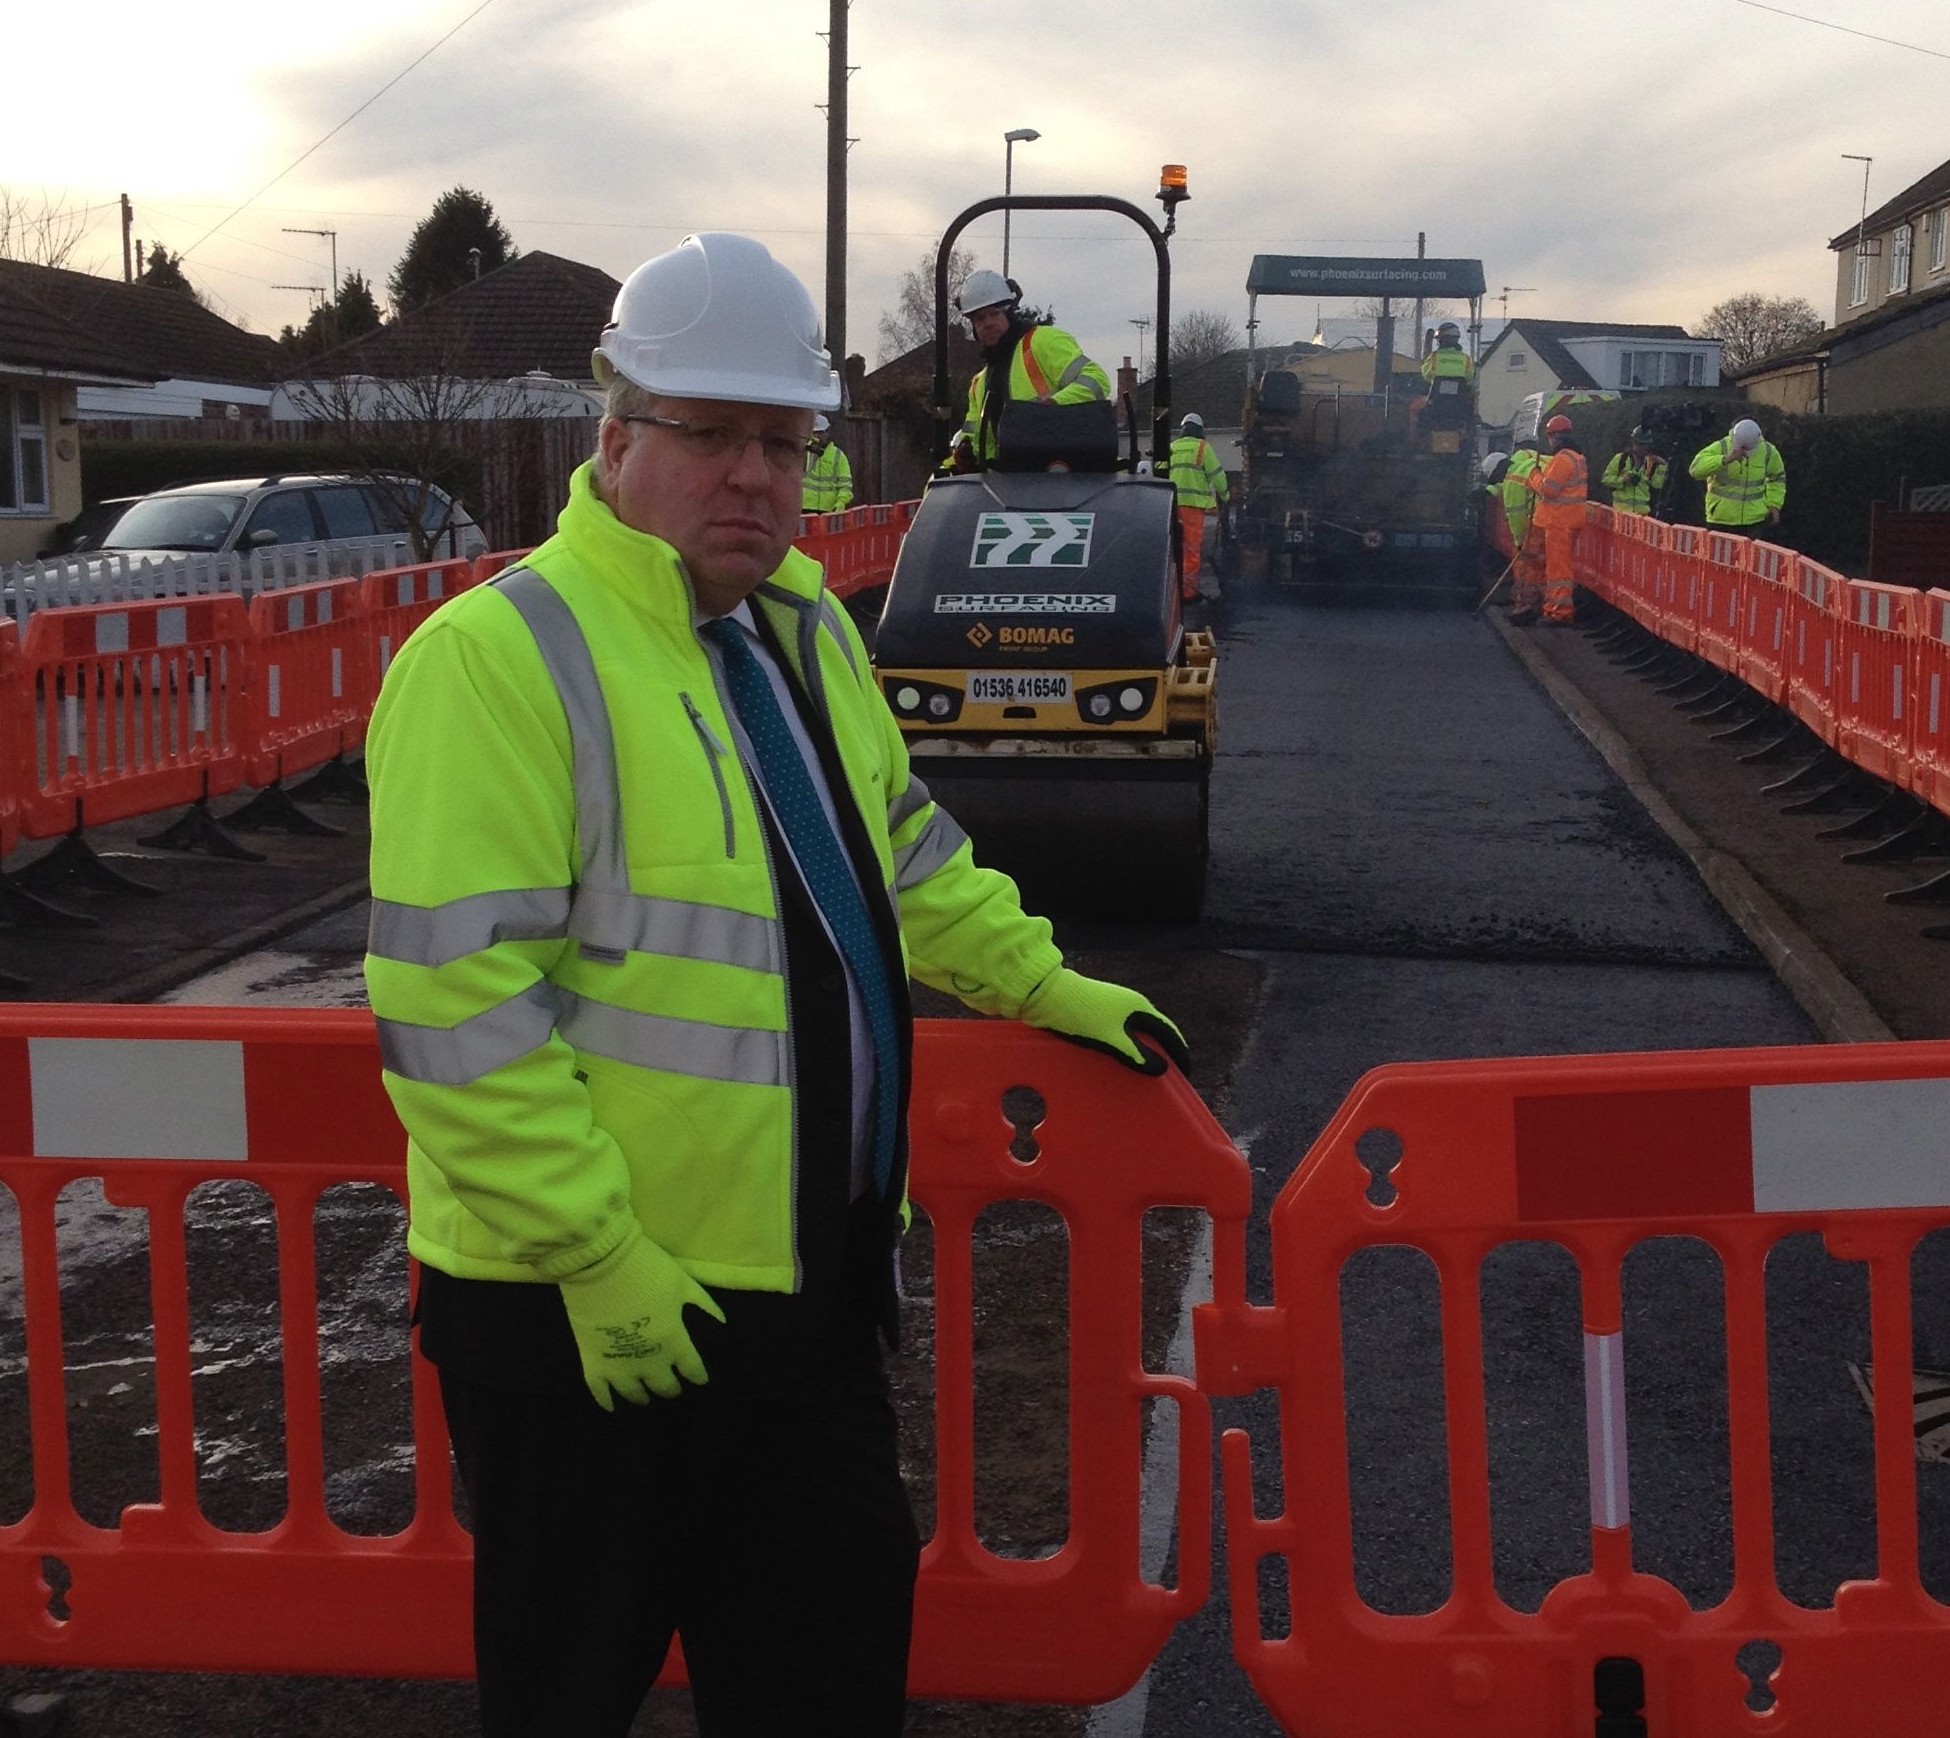 £6 billion to be invested in fixing potholes